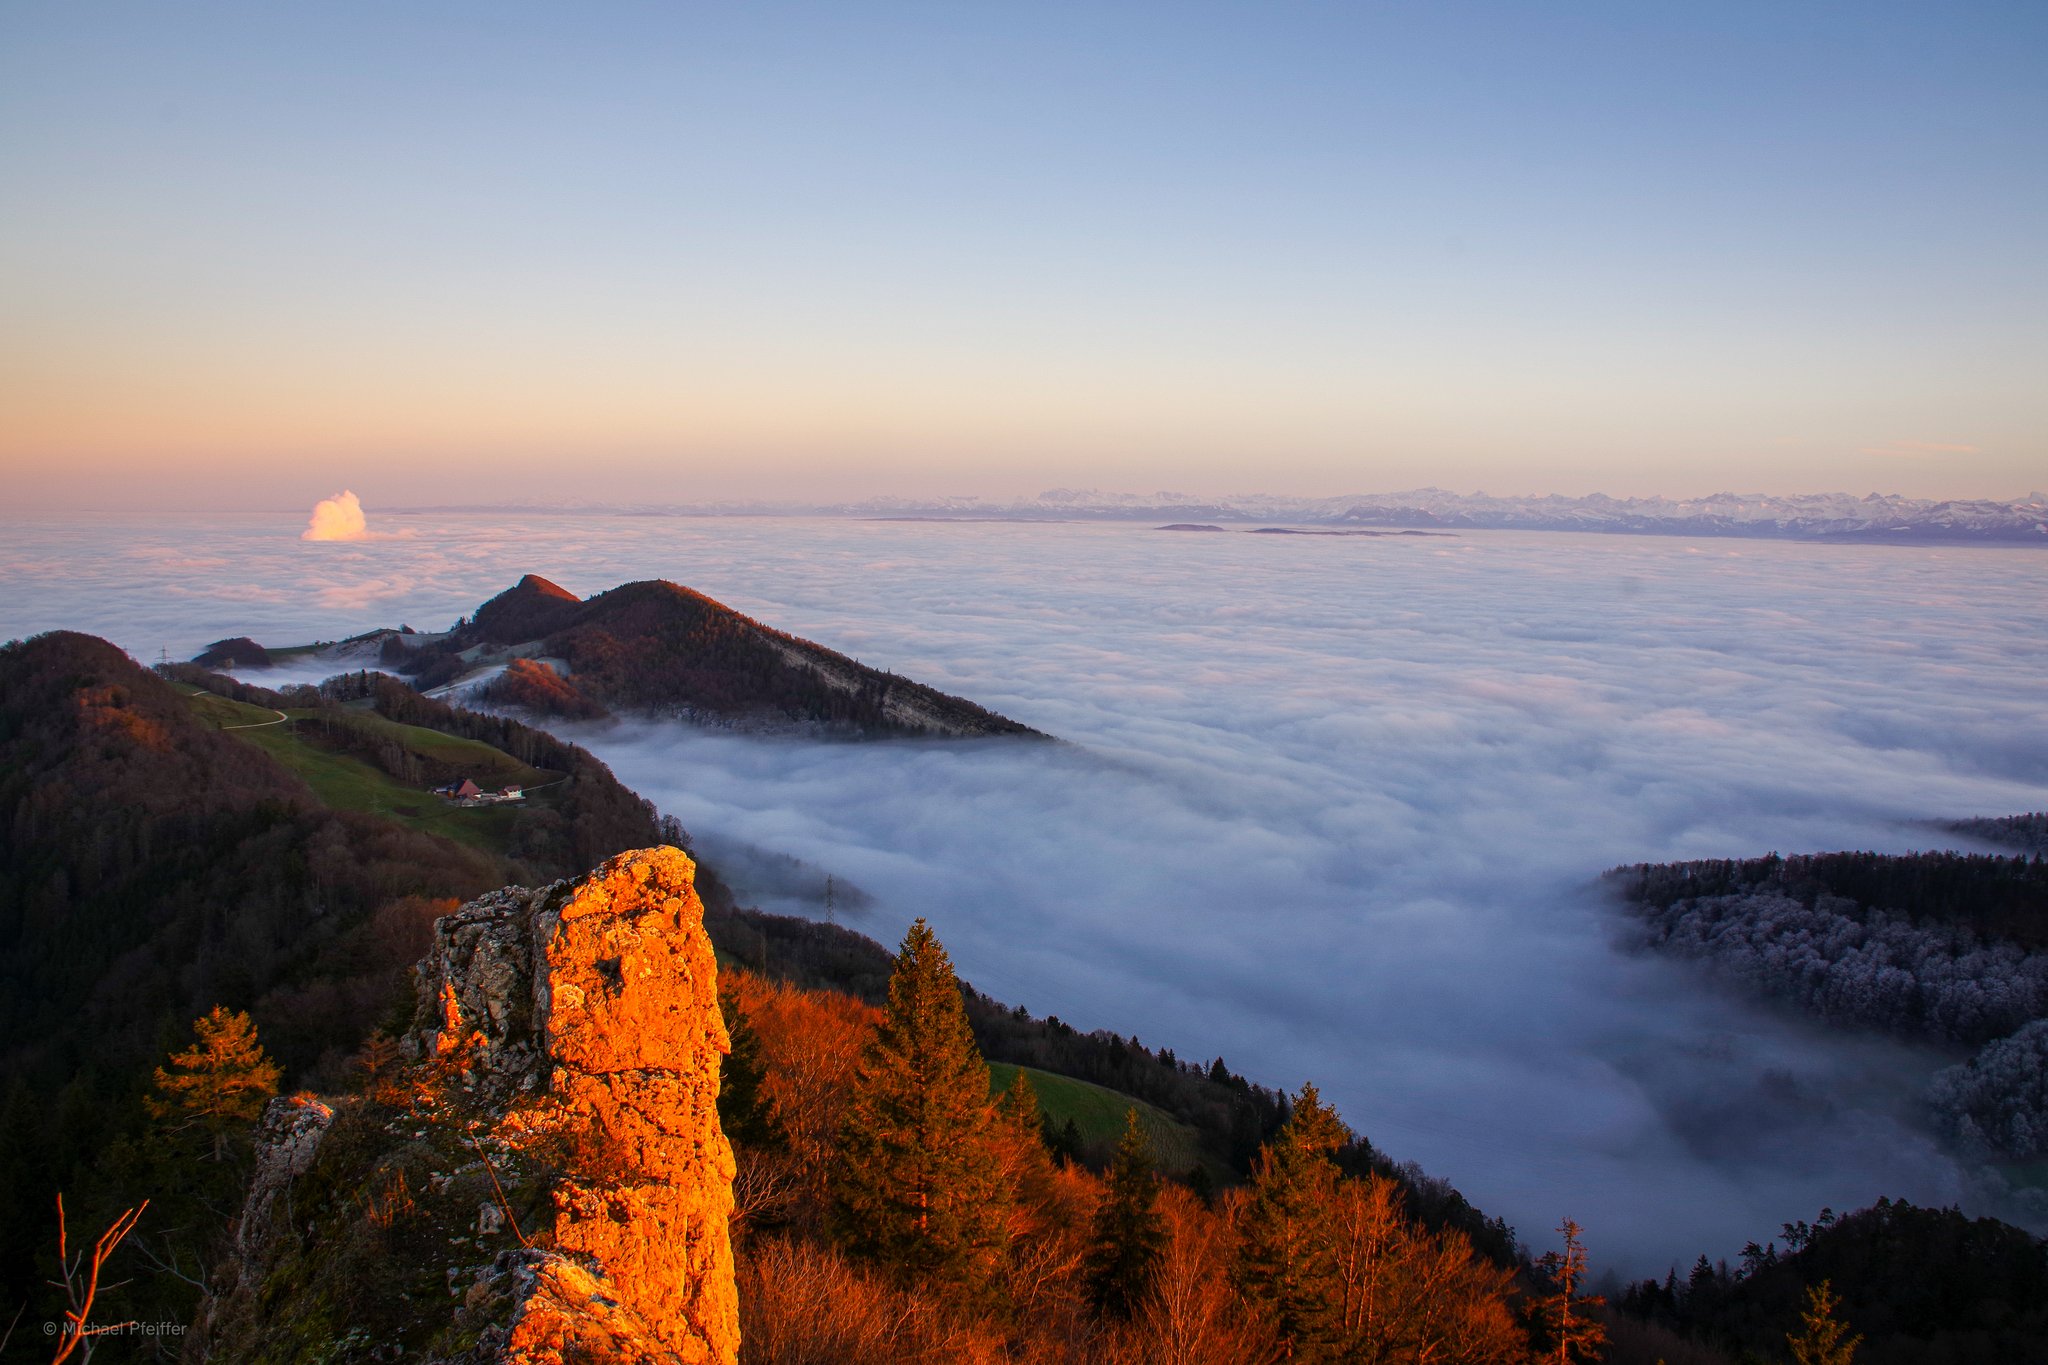 Sea of fog over the Mittelland in Switzerland by Wetter Ludwigsburg @lubuwetter